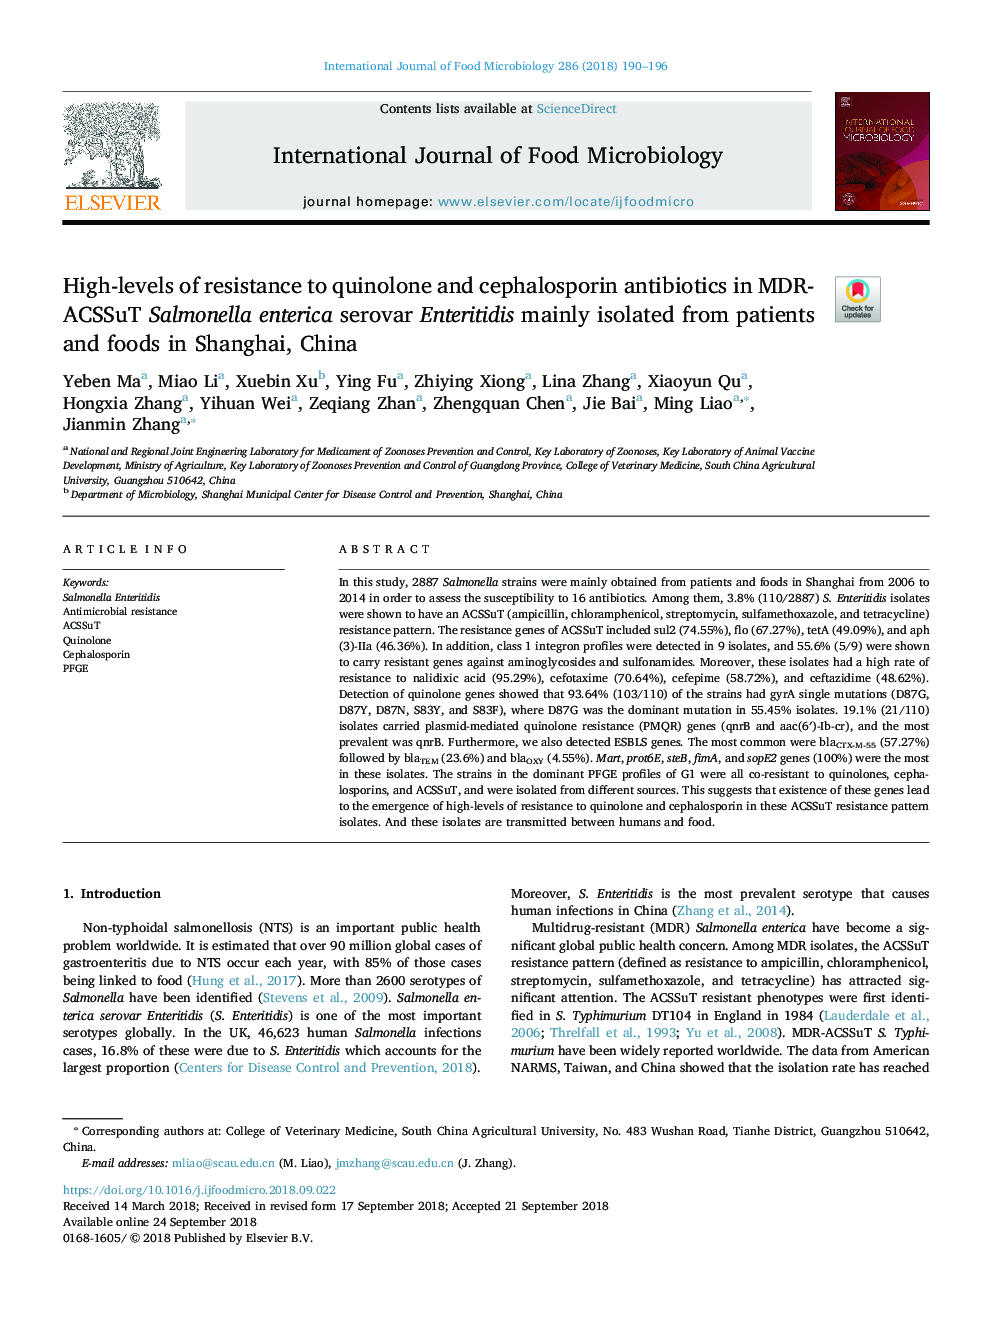 High-levels of resistance to quinolone and cephalosporin antibiotics in MDR-ACSSuT Salmonella enterica serovar Enteritidis mainly isolated from patients and foods in Shanghai, China